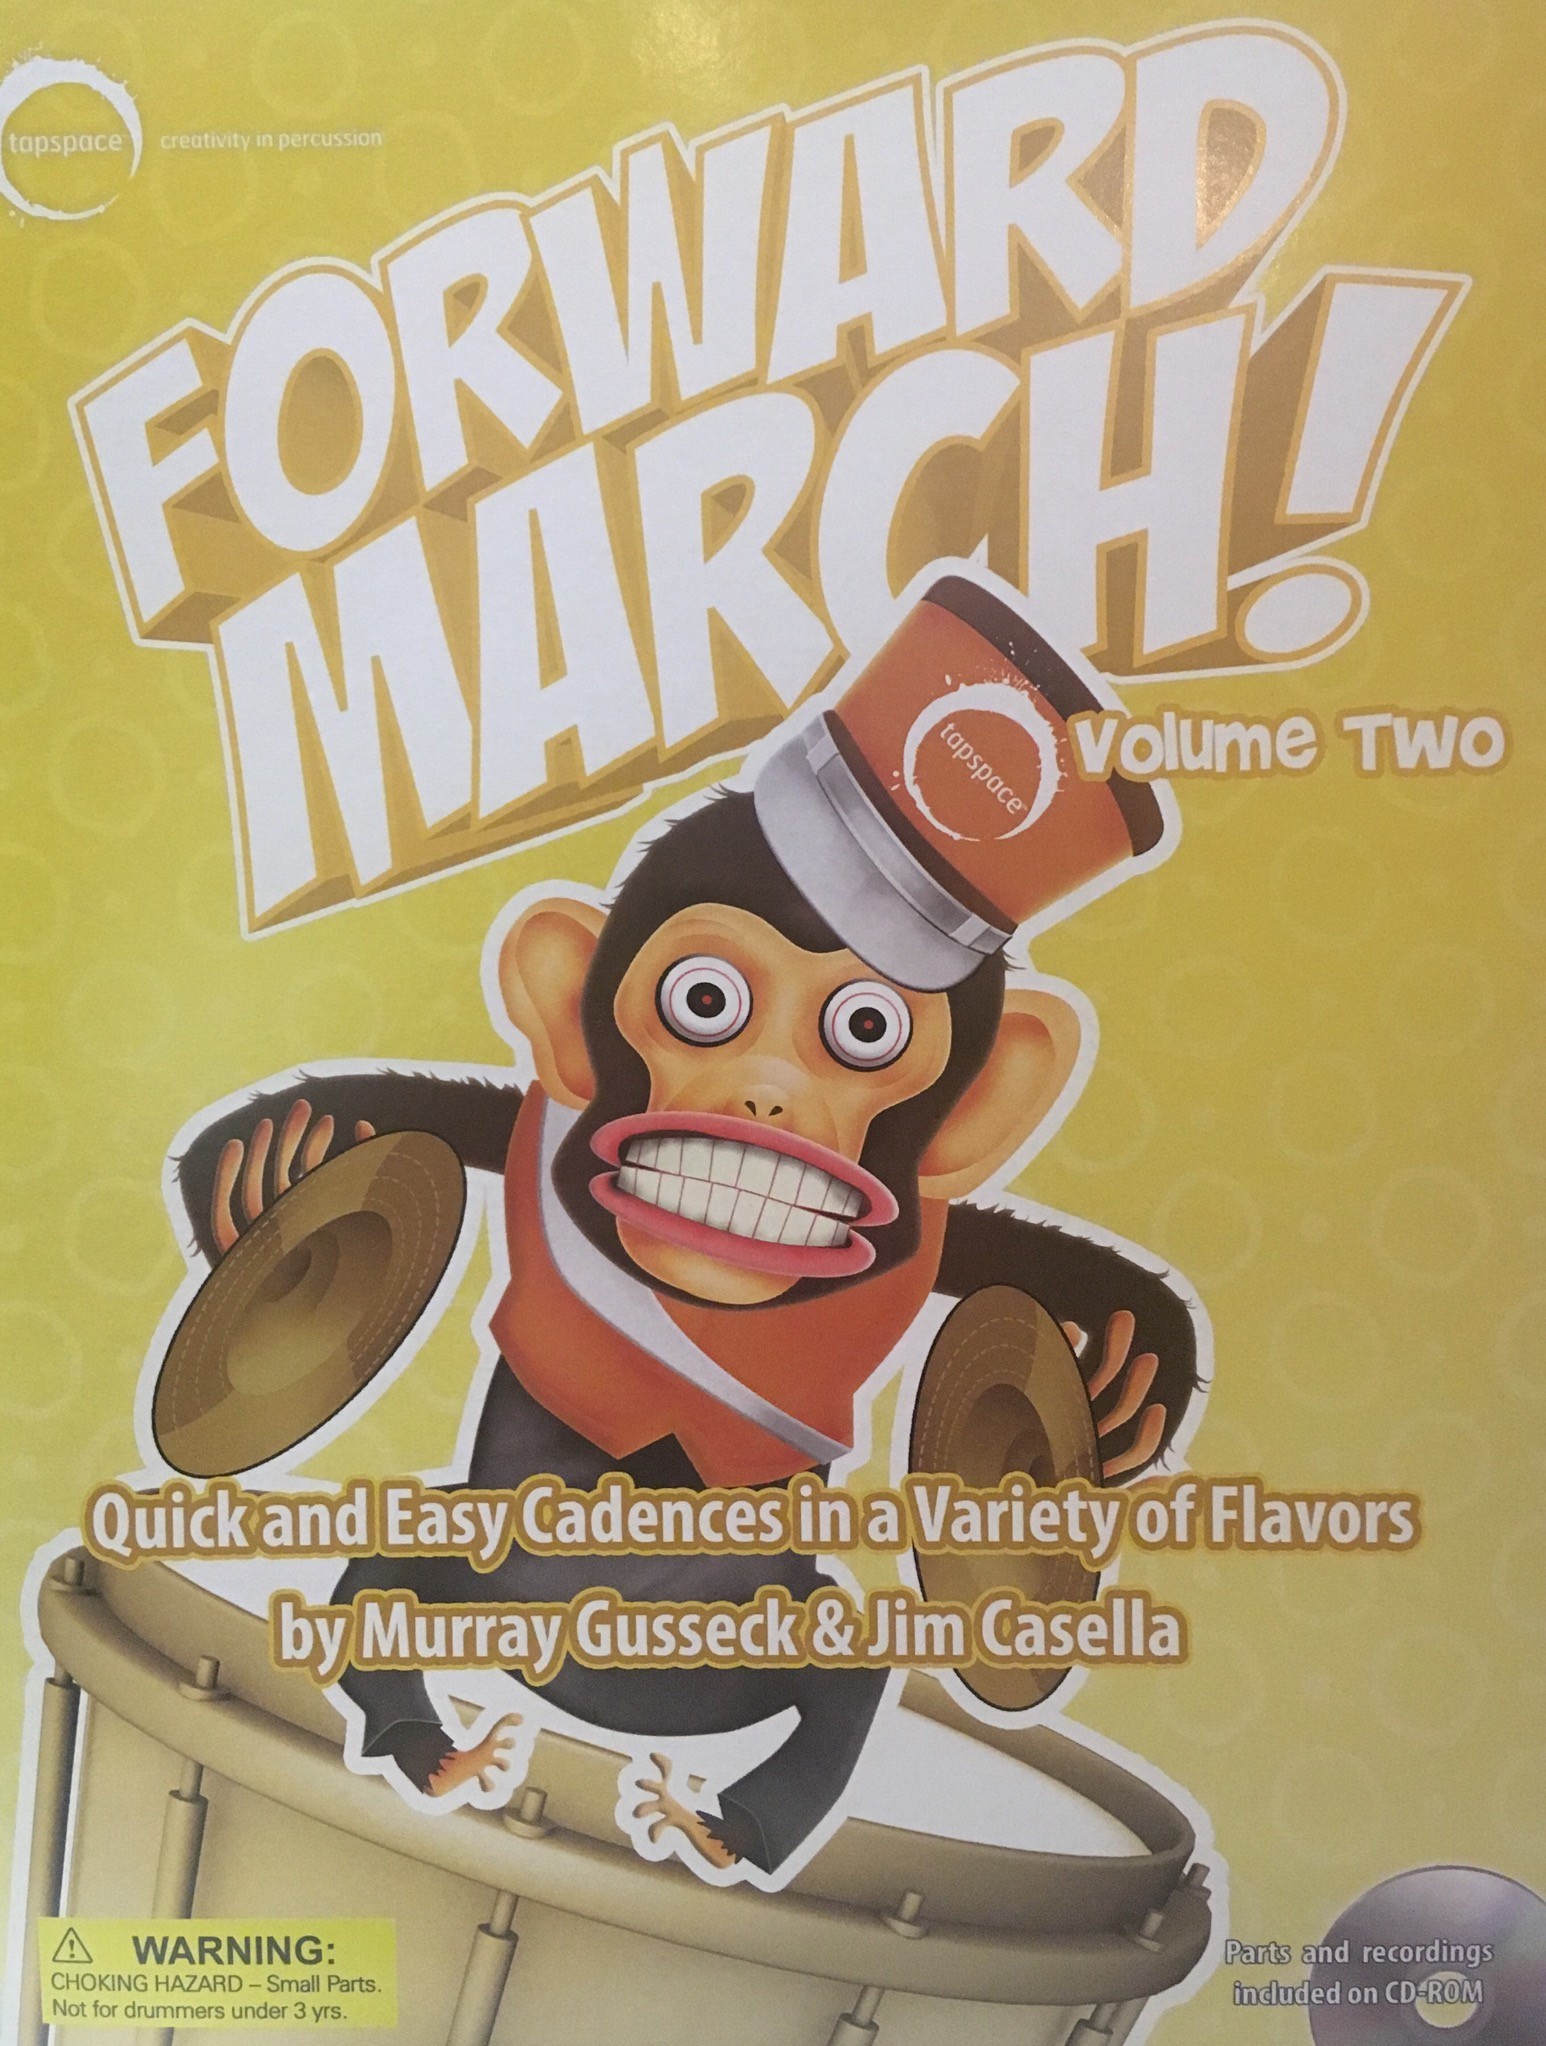 Forward March! volume two by Jim Casella